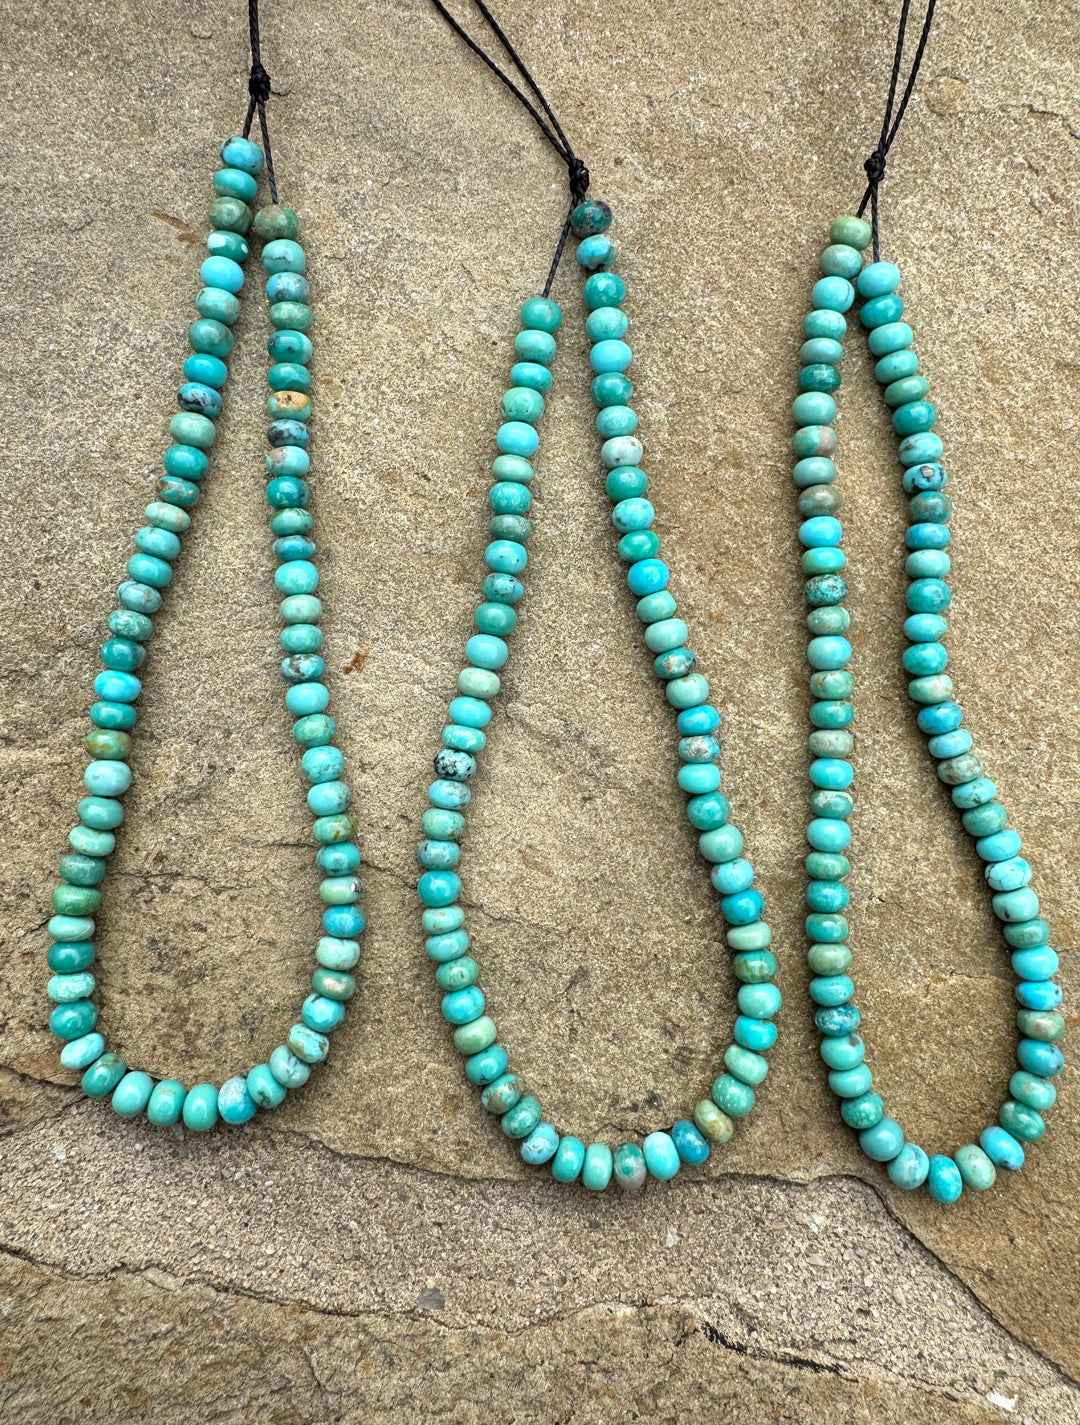 Campitos (Mex) Turquoise 5mm Rondelle Beads (9 inch